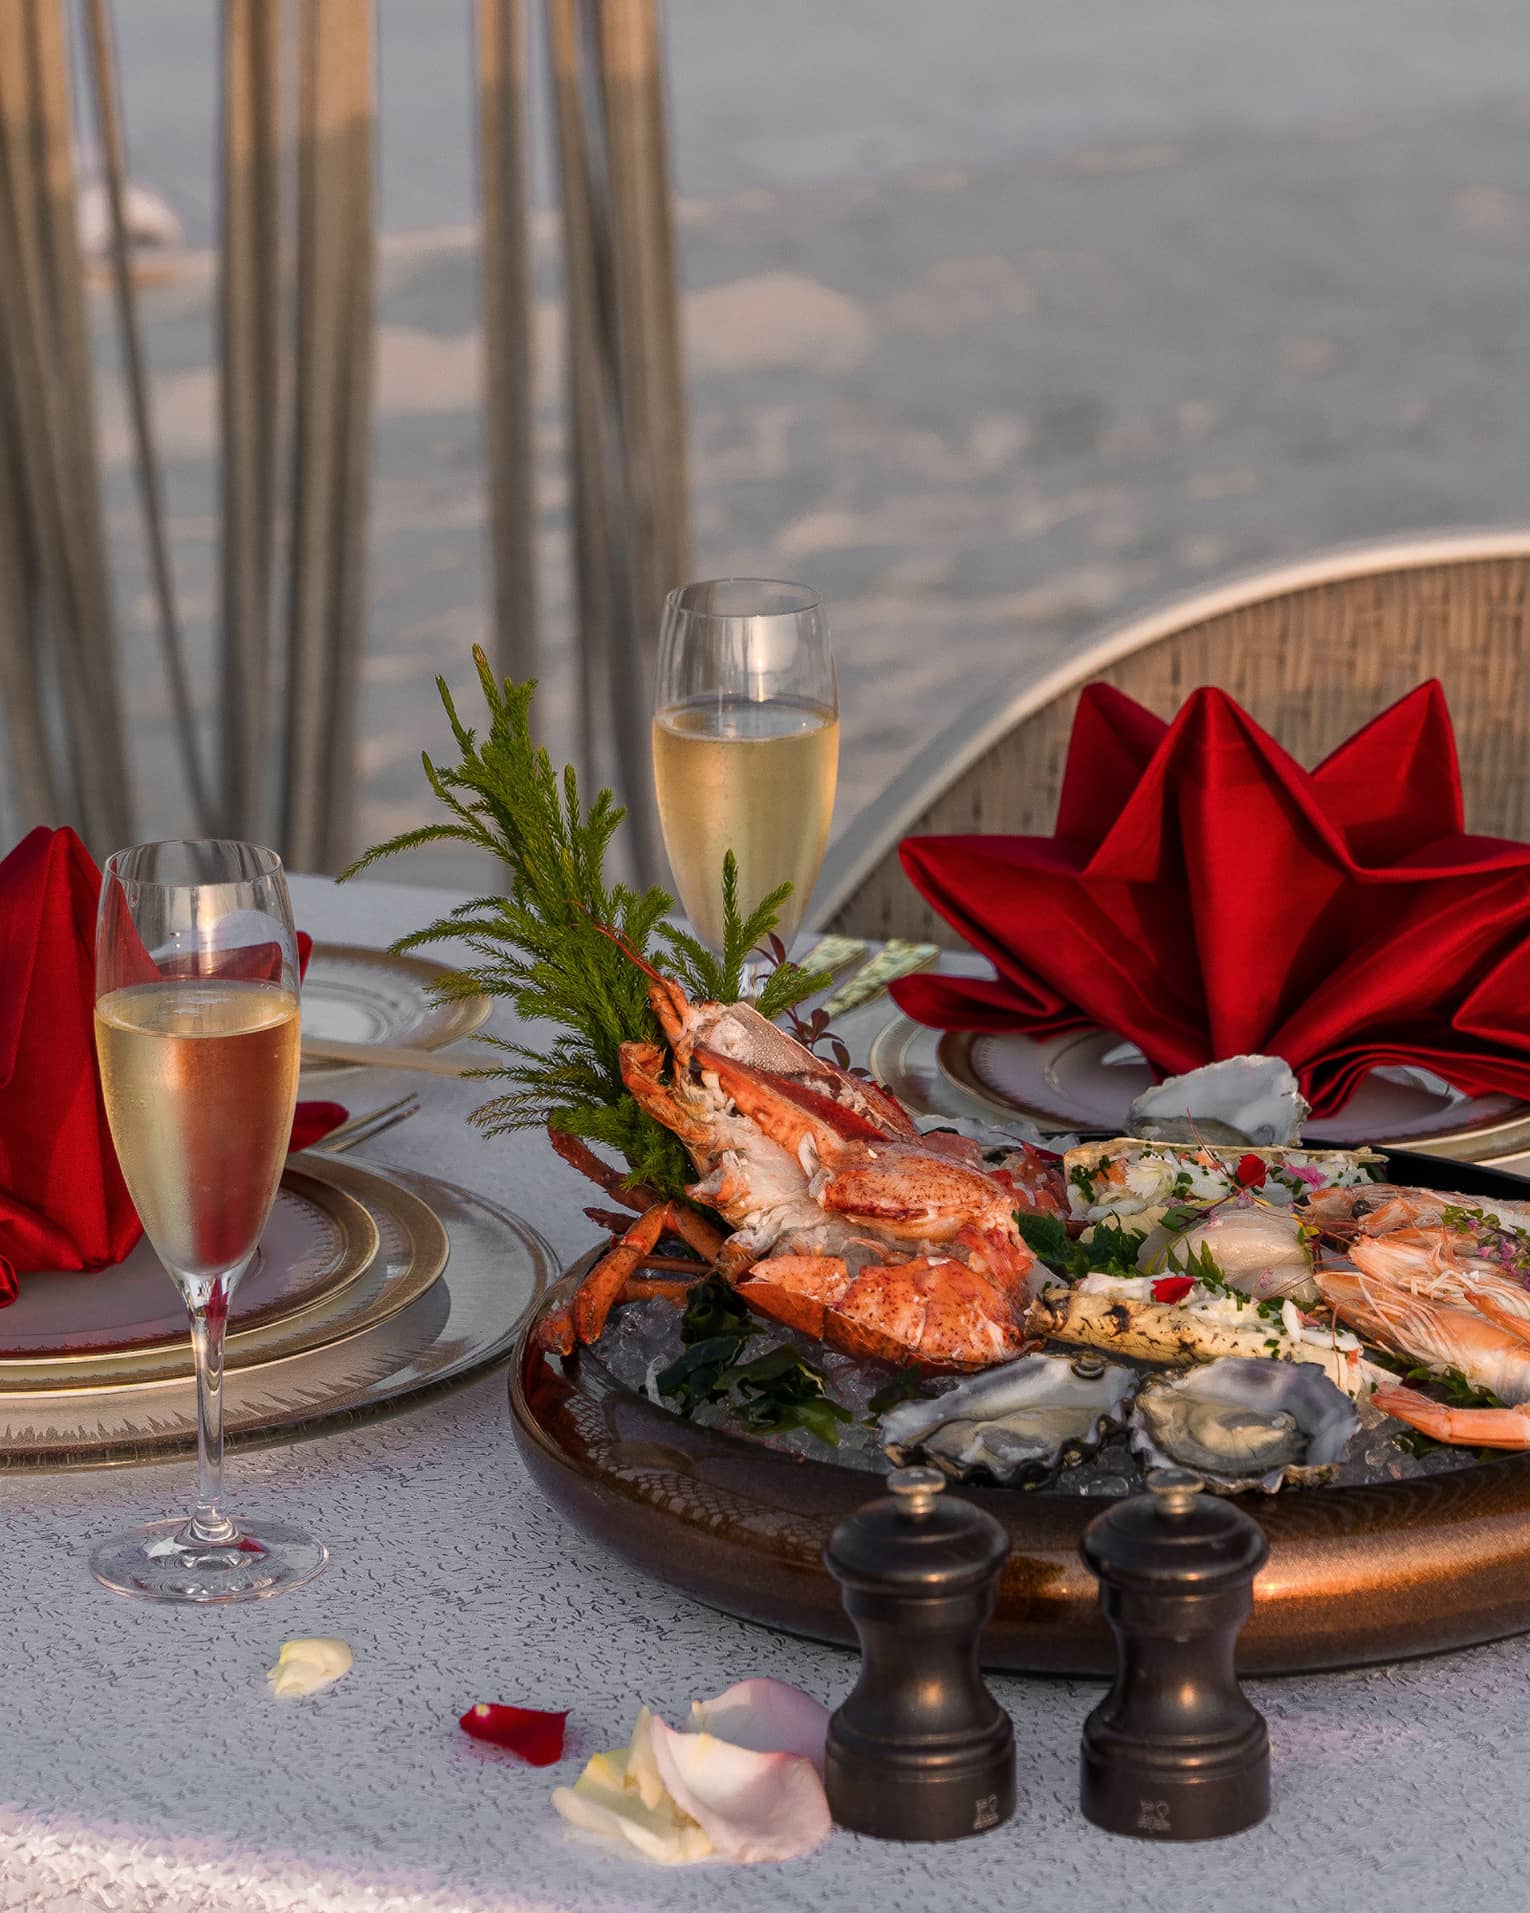 A table set on the beach with crab, champagne and red napkins.